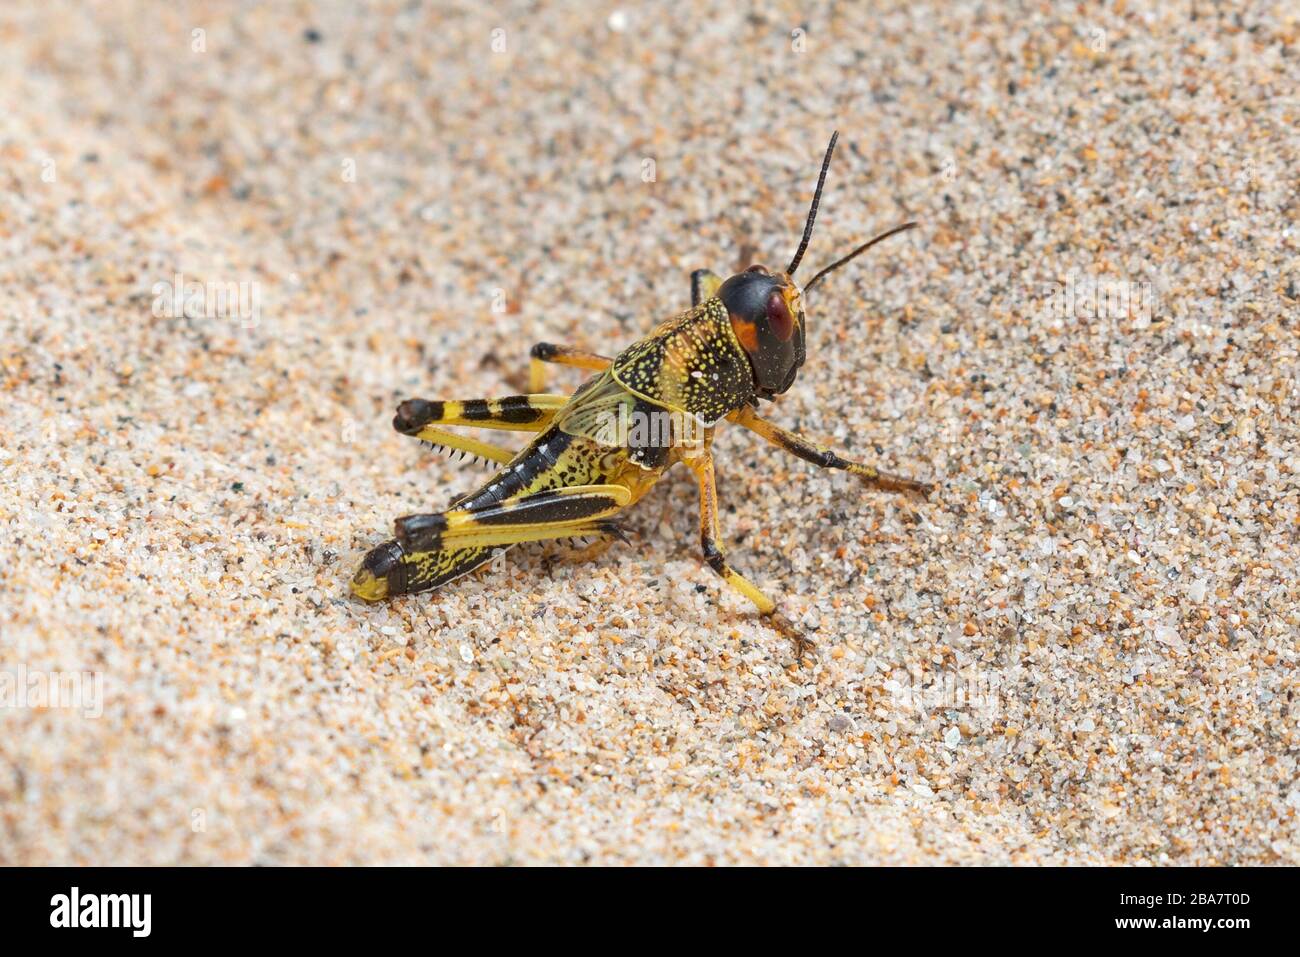 The Desert Locust, Schistocerca Gregaria. A juvenile young locust recently hatched in the North of Oman, in the Middle East. Noted for its swarming. Stock Photo